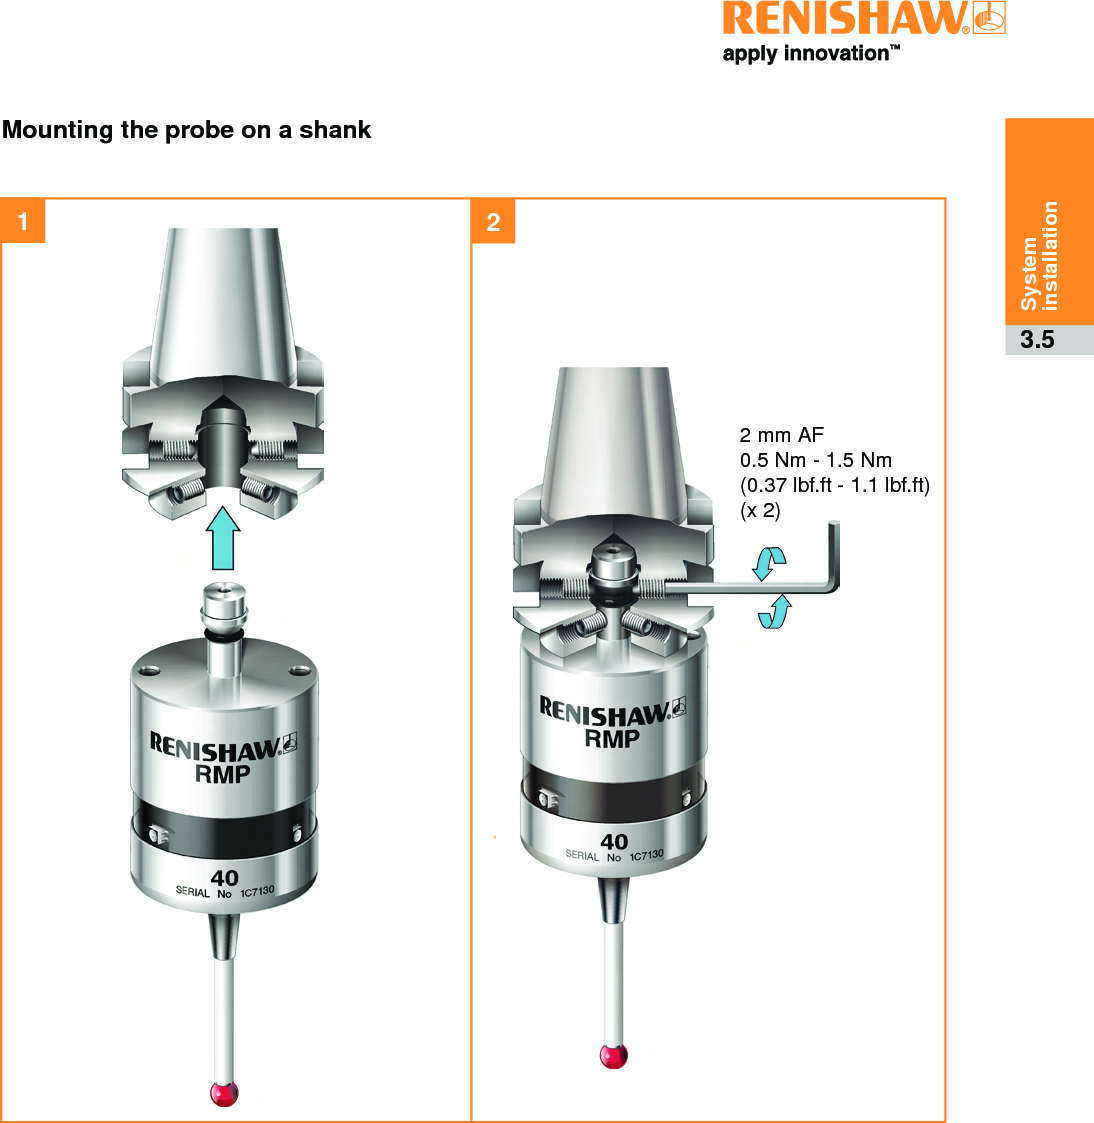 3.5System installationMounting the probe on a shank122 mm AF0.5 Nm - 1.5 Nm (0.37 lbf.ft - 1.1 lbf.ft)  (x 2)